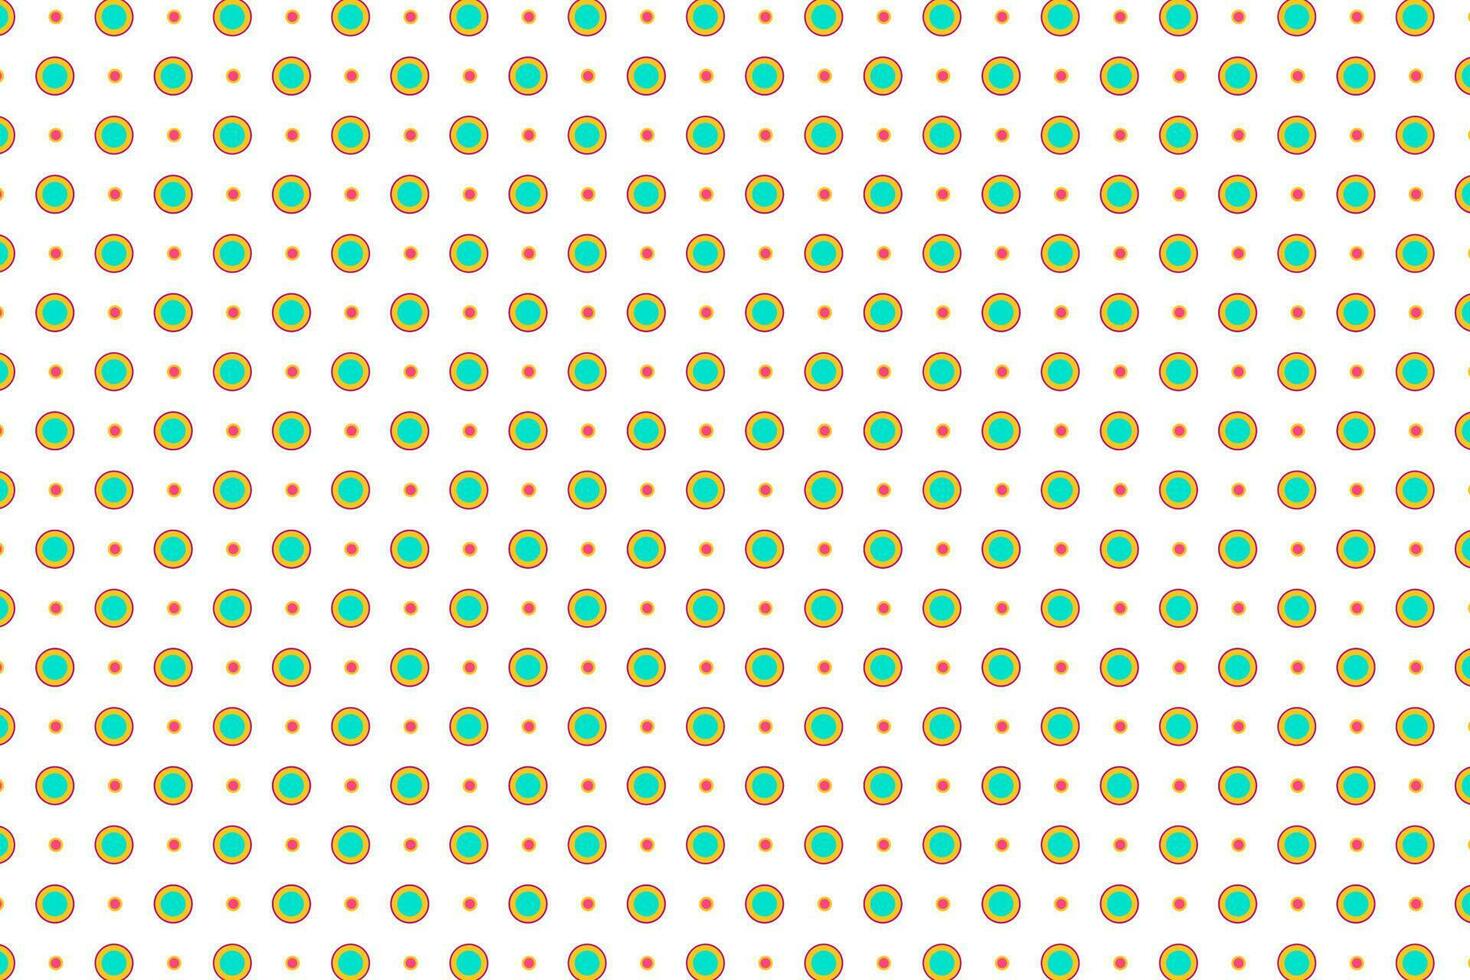 Polka dot seamless pattern for textile, fabric, fashion, wallpaper, background. vector